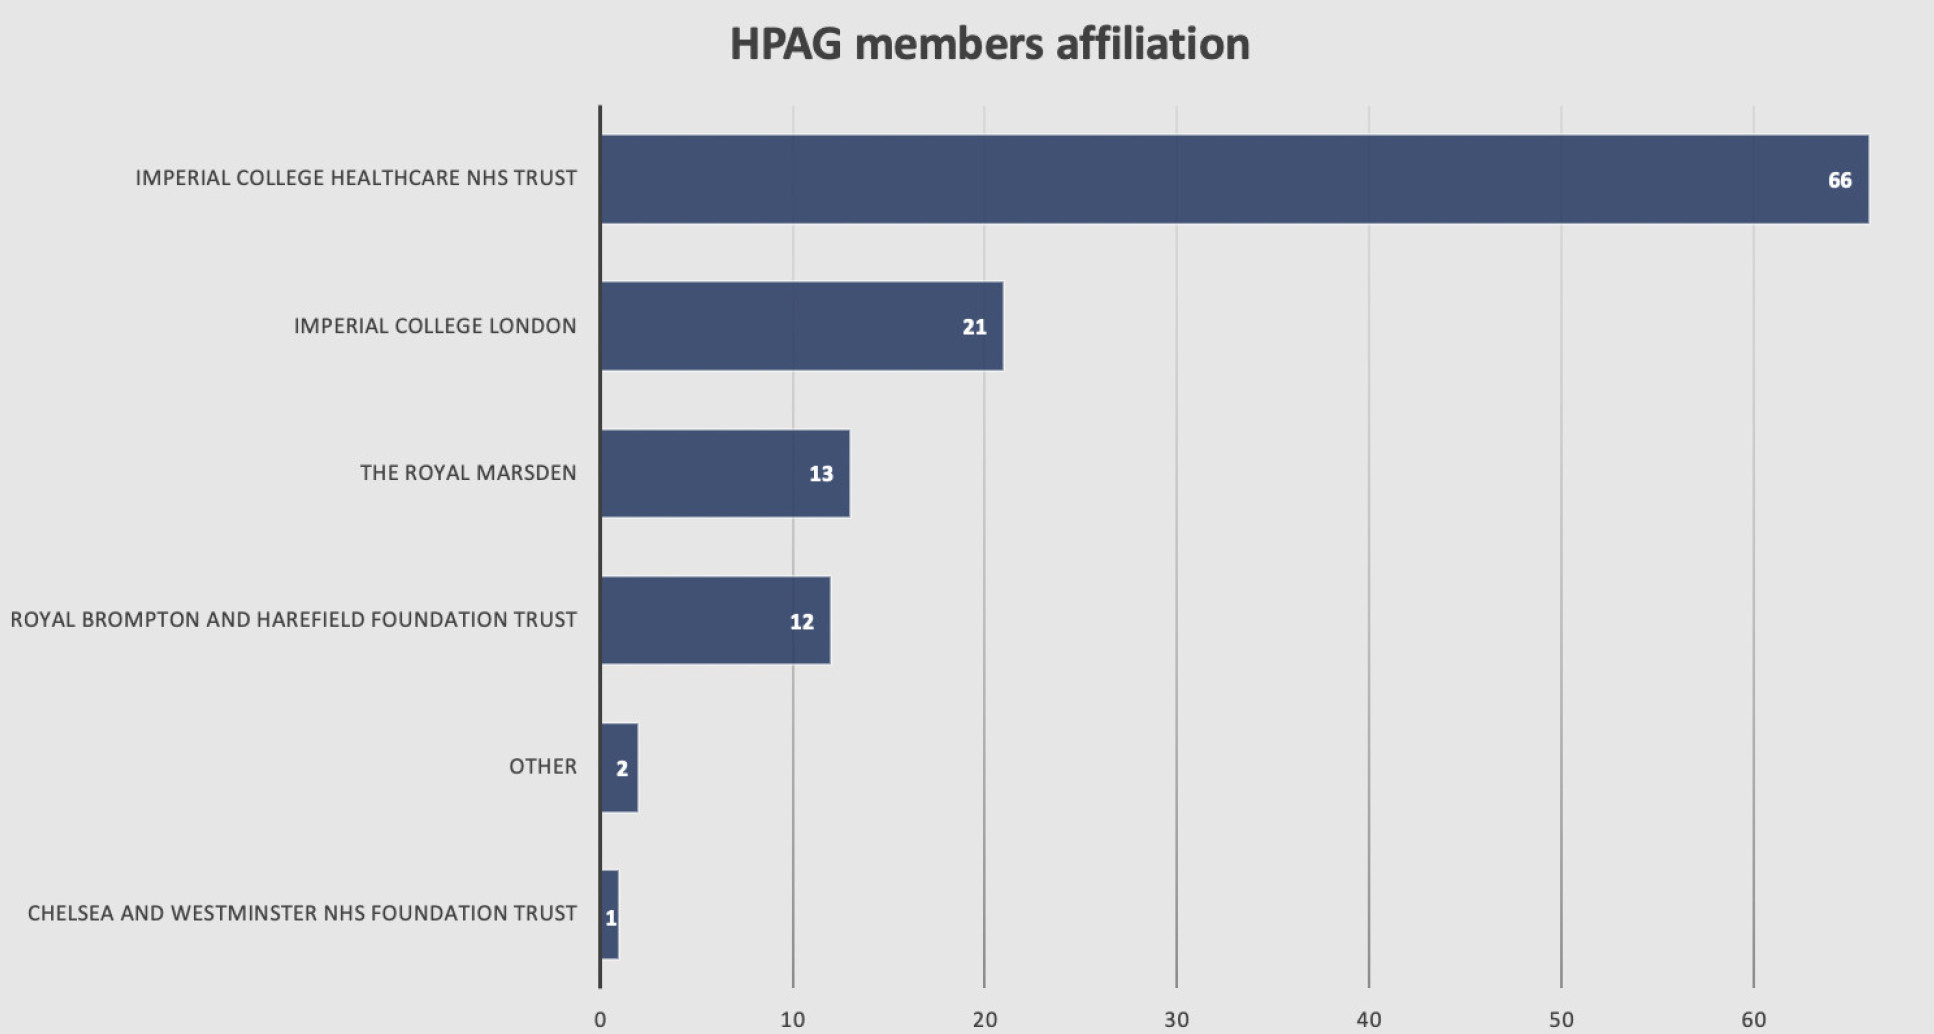 HPAG members affiliation